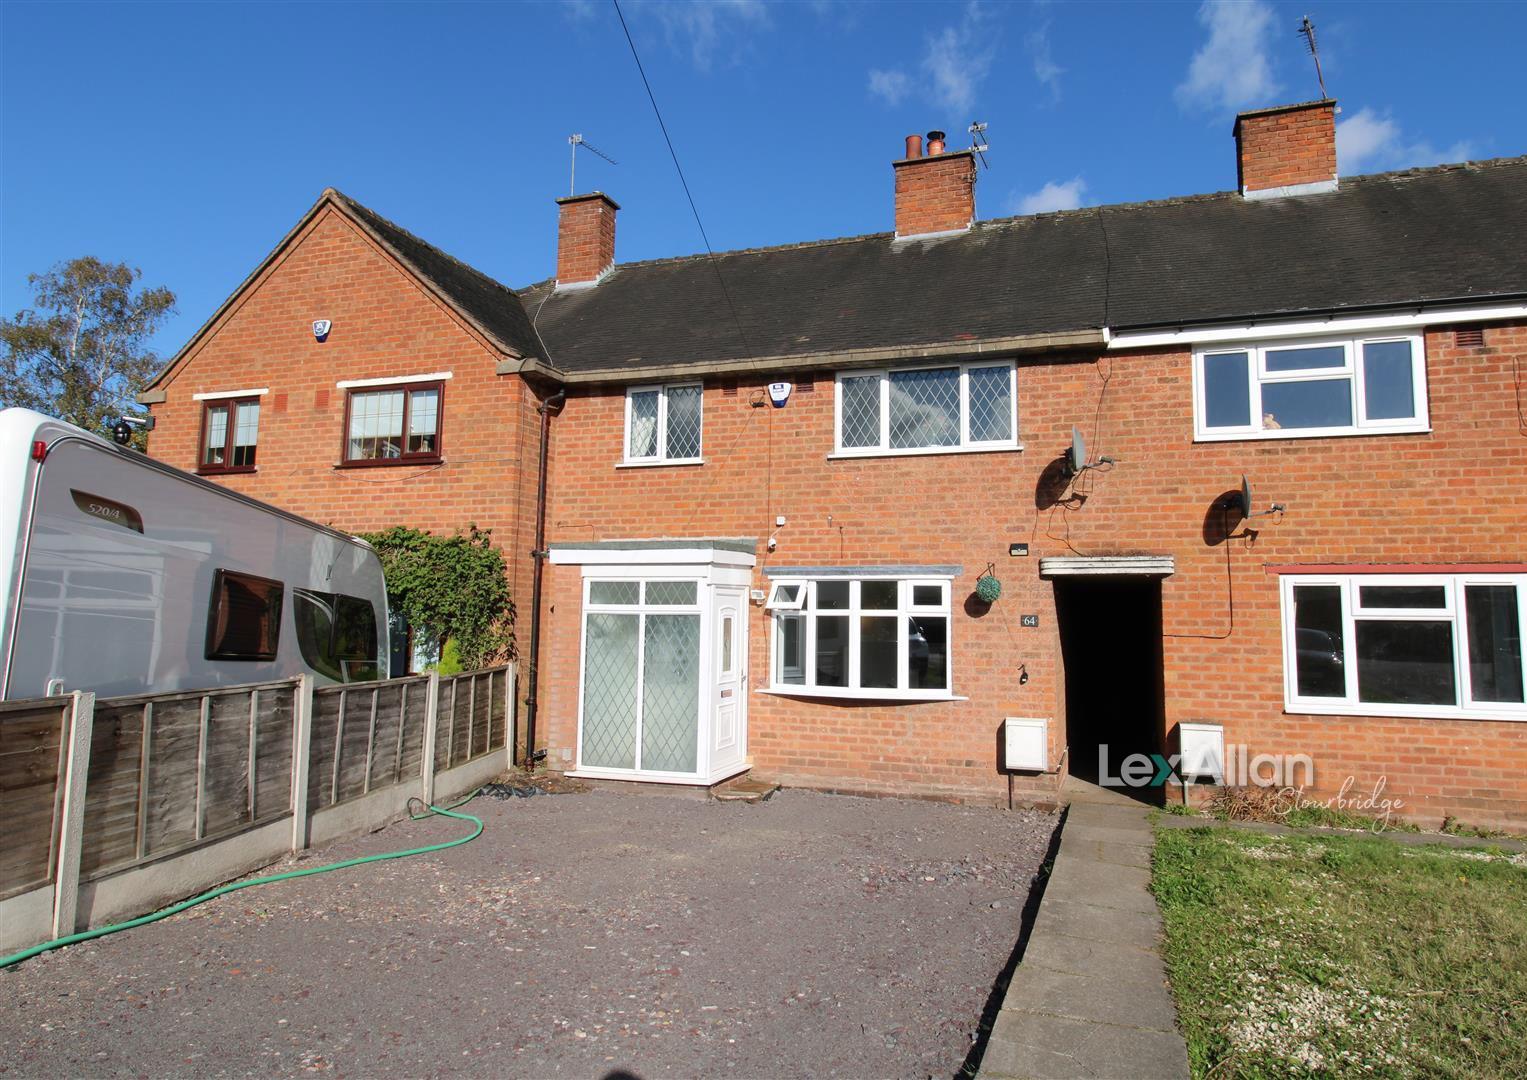 3 bed  for sale in Shenstone Avenue, Stourbridge, DY8 